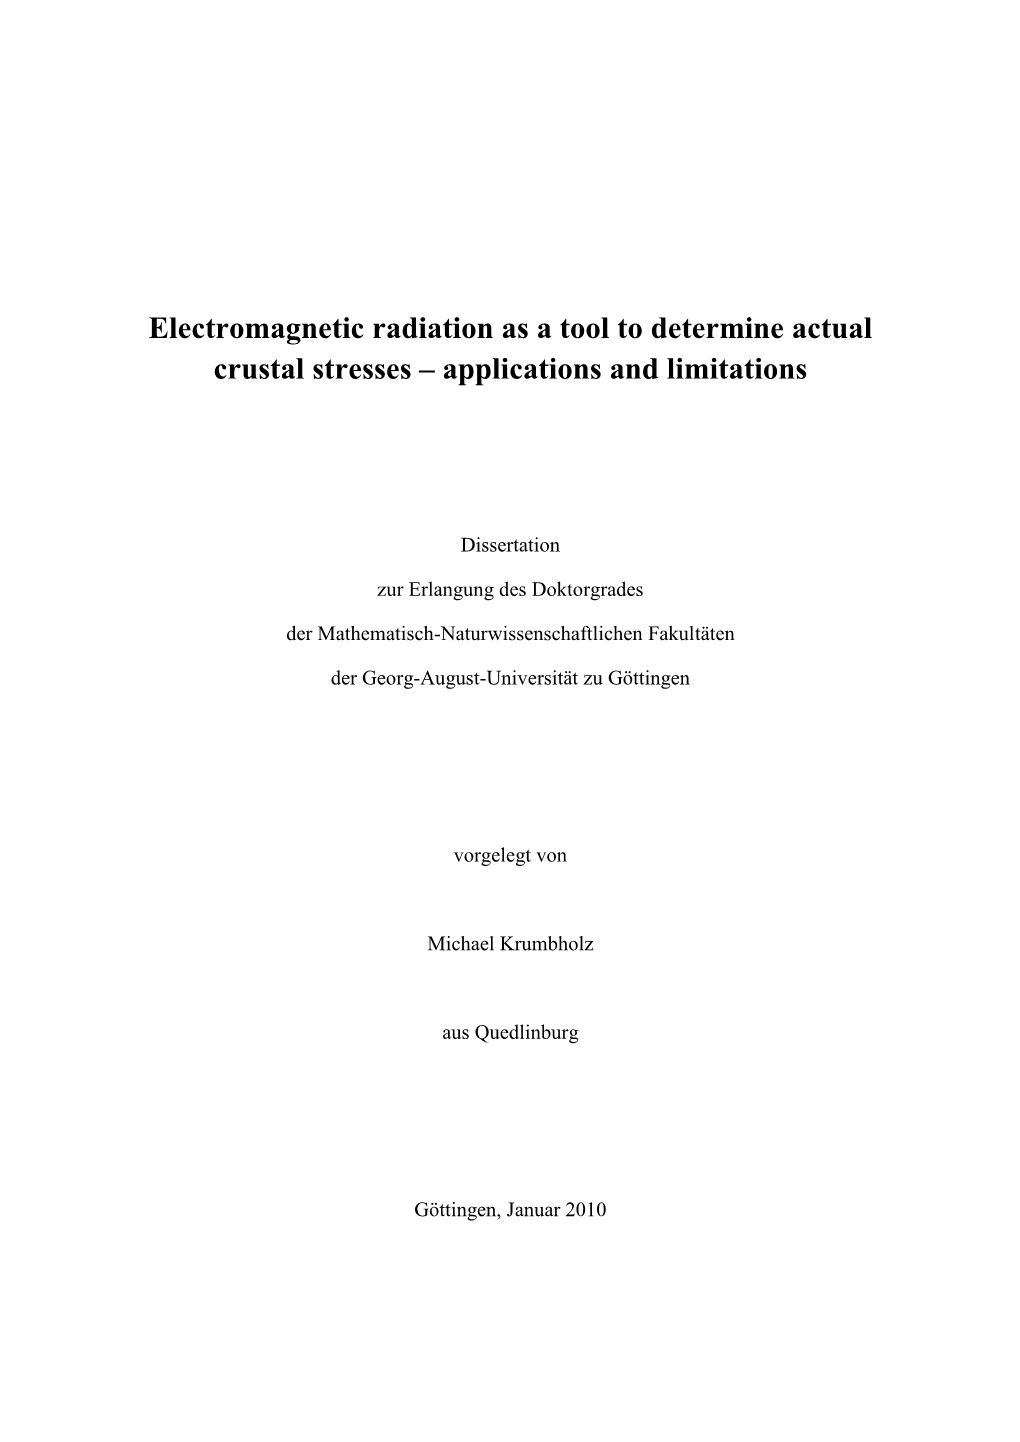 Electromagnetic Radiation As a Tool to Determine Actual Crustal Stresses – Applications and Limitations